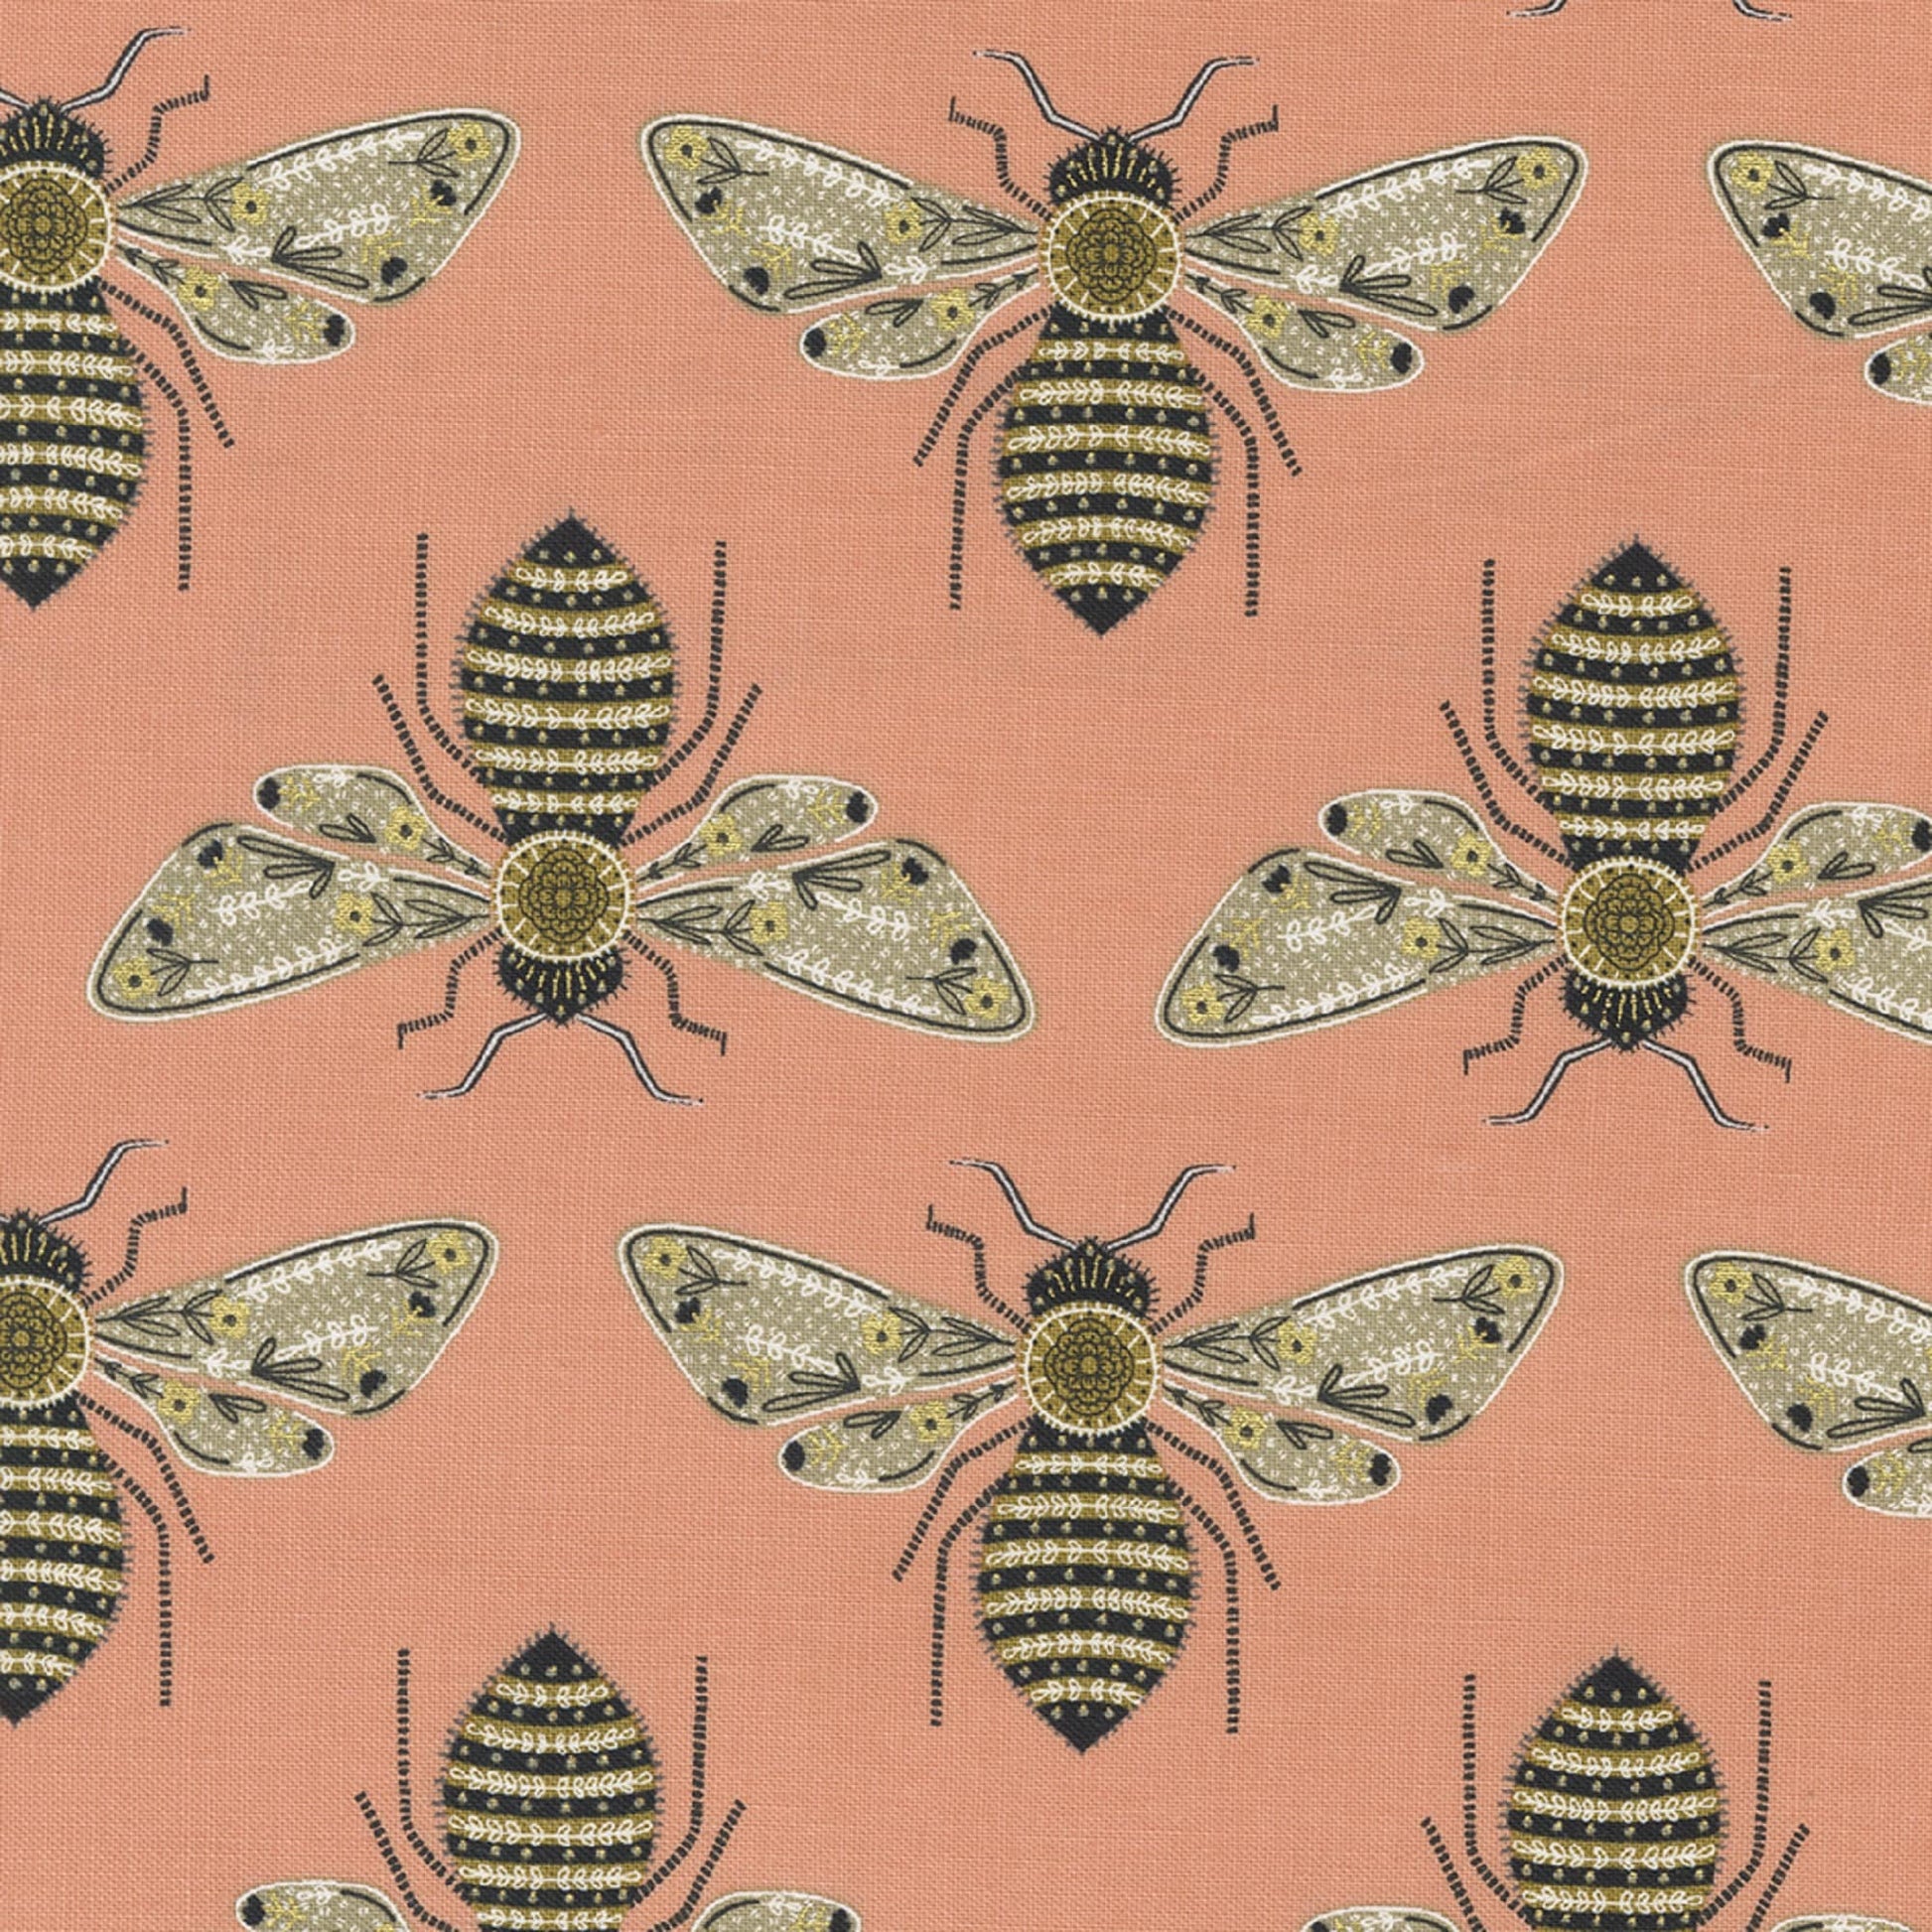 Bumble Bee Blossom Gold METALLIC Meadowmere Gingiber Moda 100% Quilters Cotton Fabric Fetish